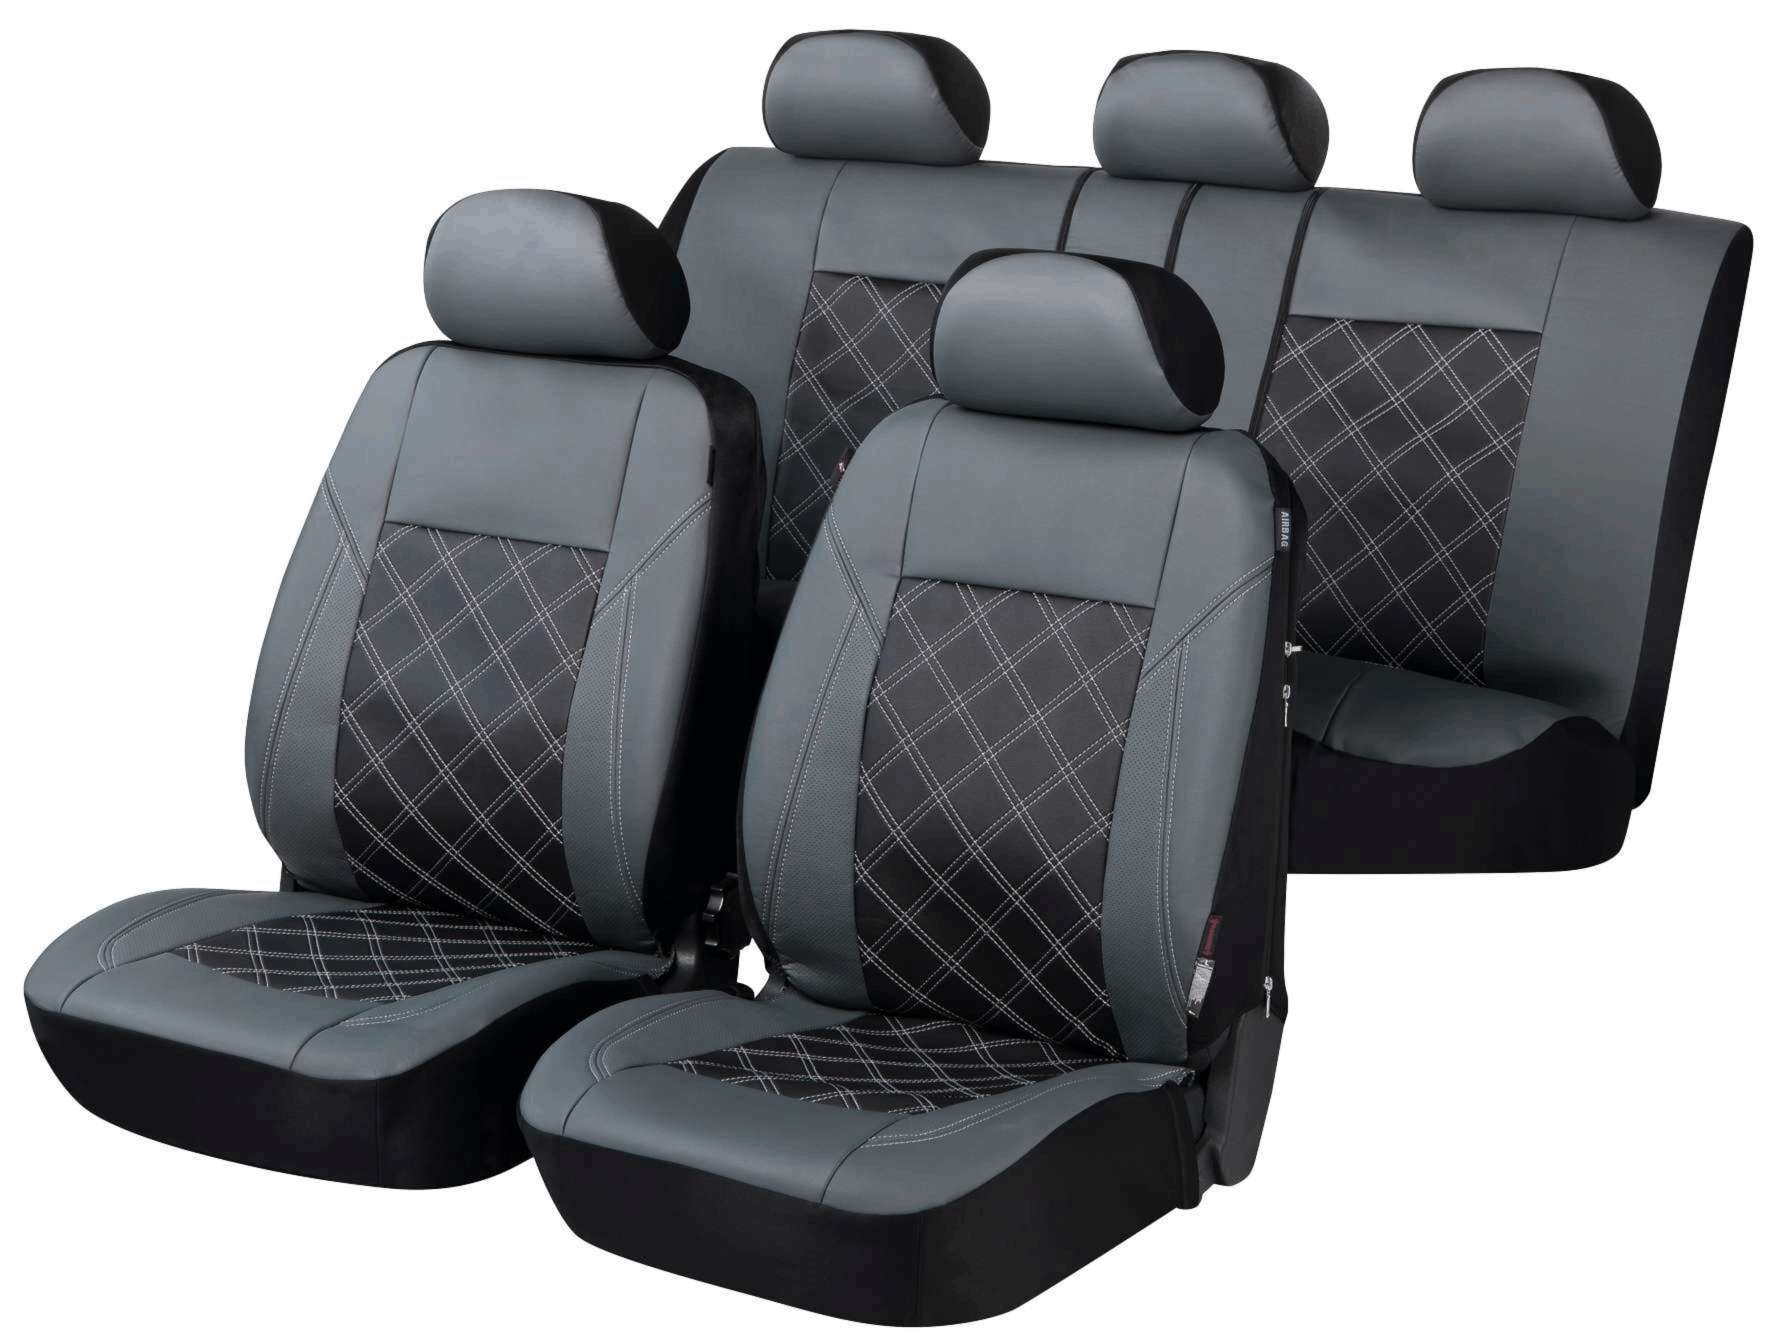 ZIPP IT Deluxe car Seat covers in Durham anthracite imitation leather with zipper system